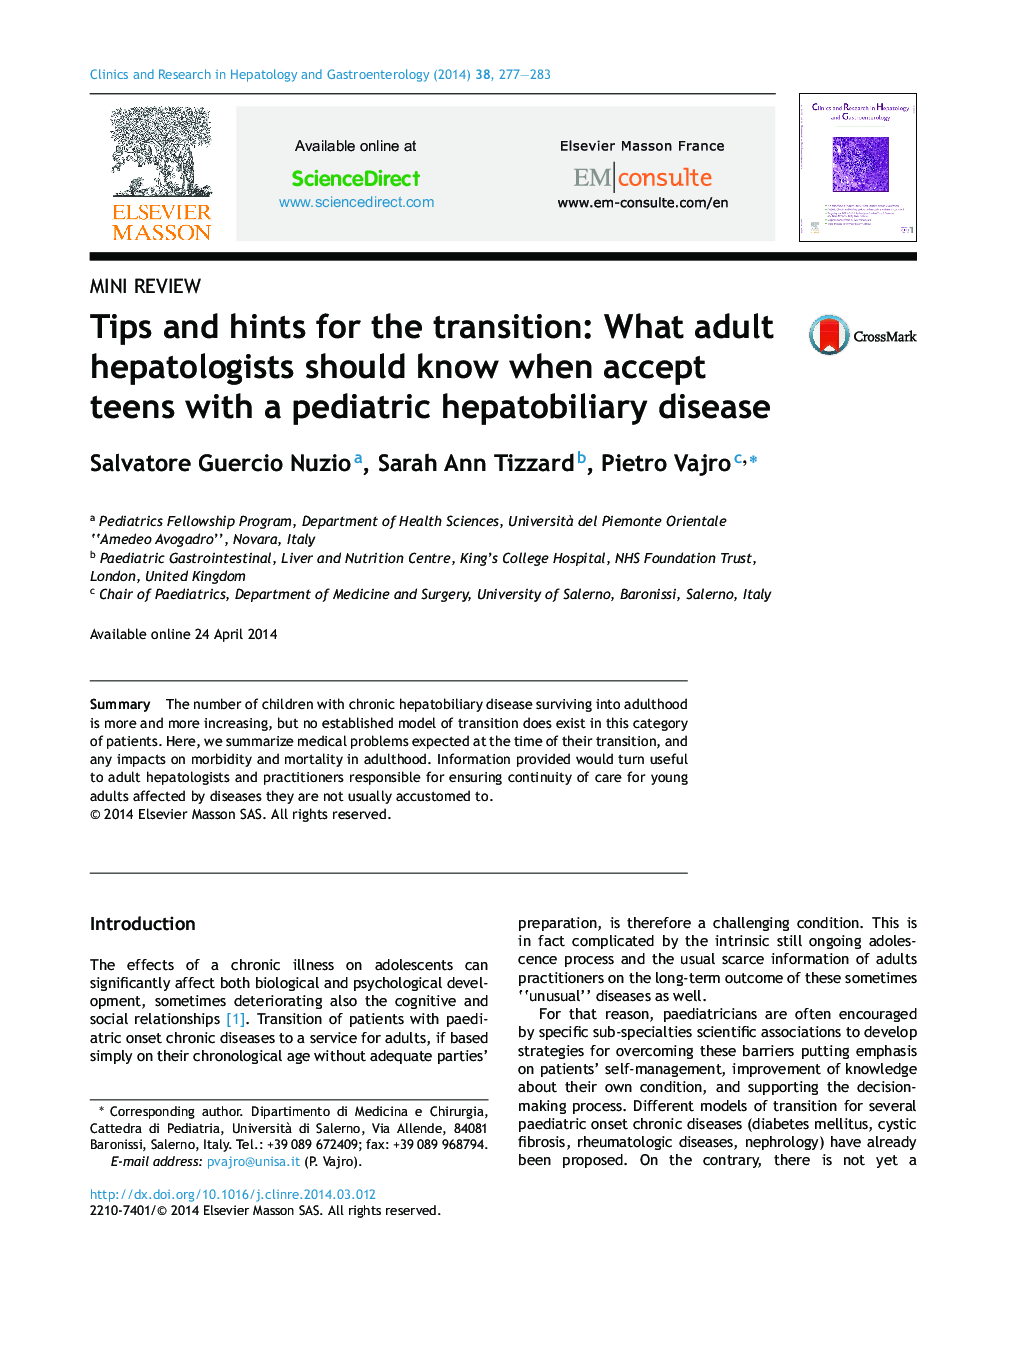 Tips and hints for the transition: What adult hepatologists should know when accept teens with a pediatric hepatobiliary disease